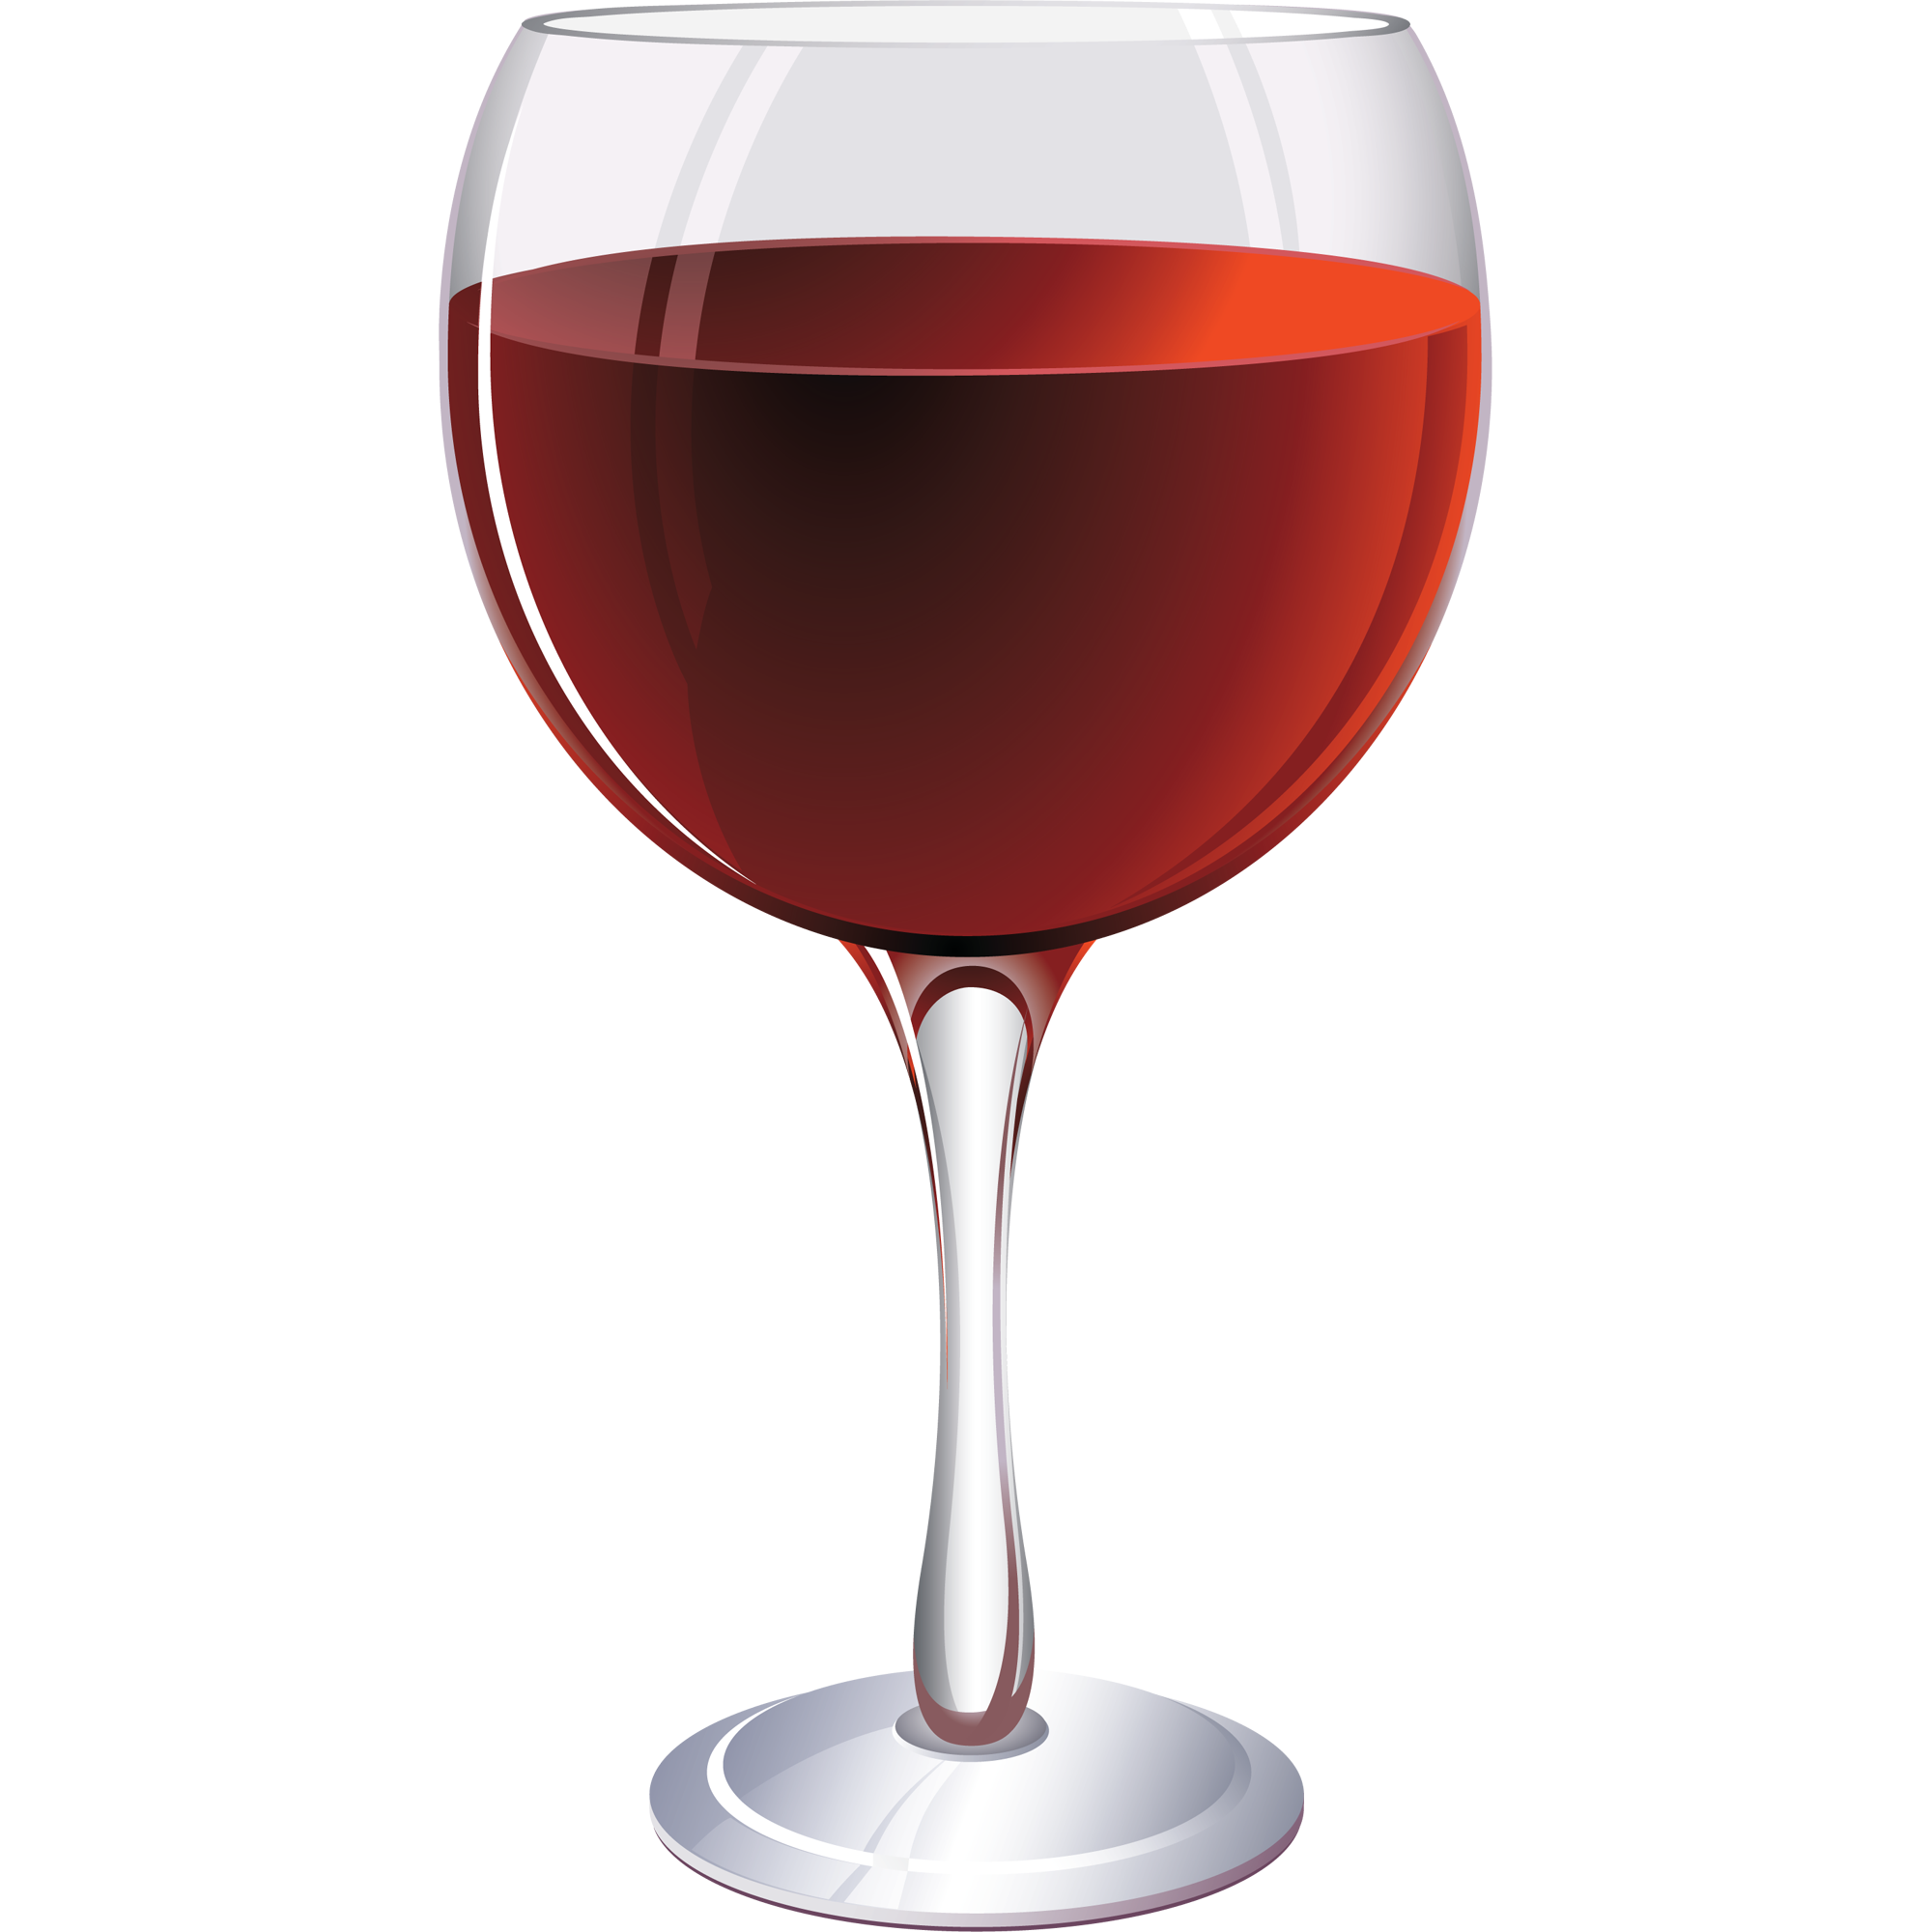 Red Wine Glass Transparent Picture